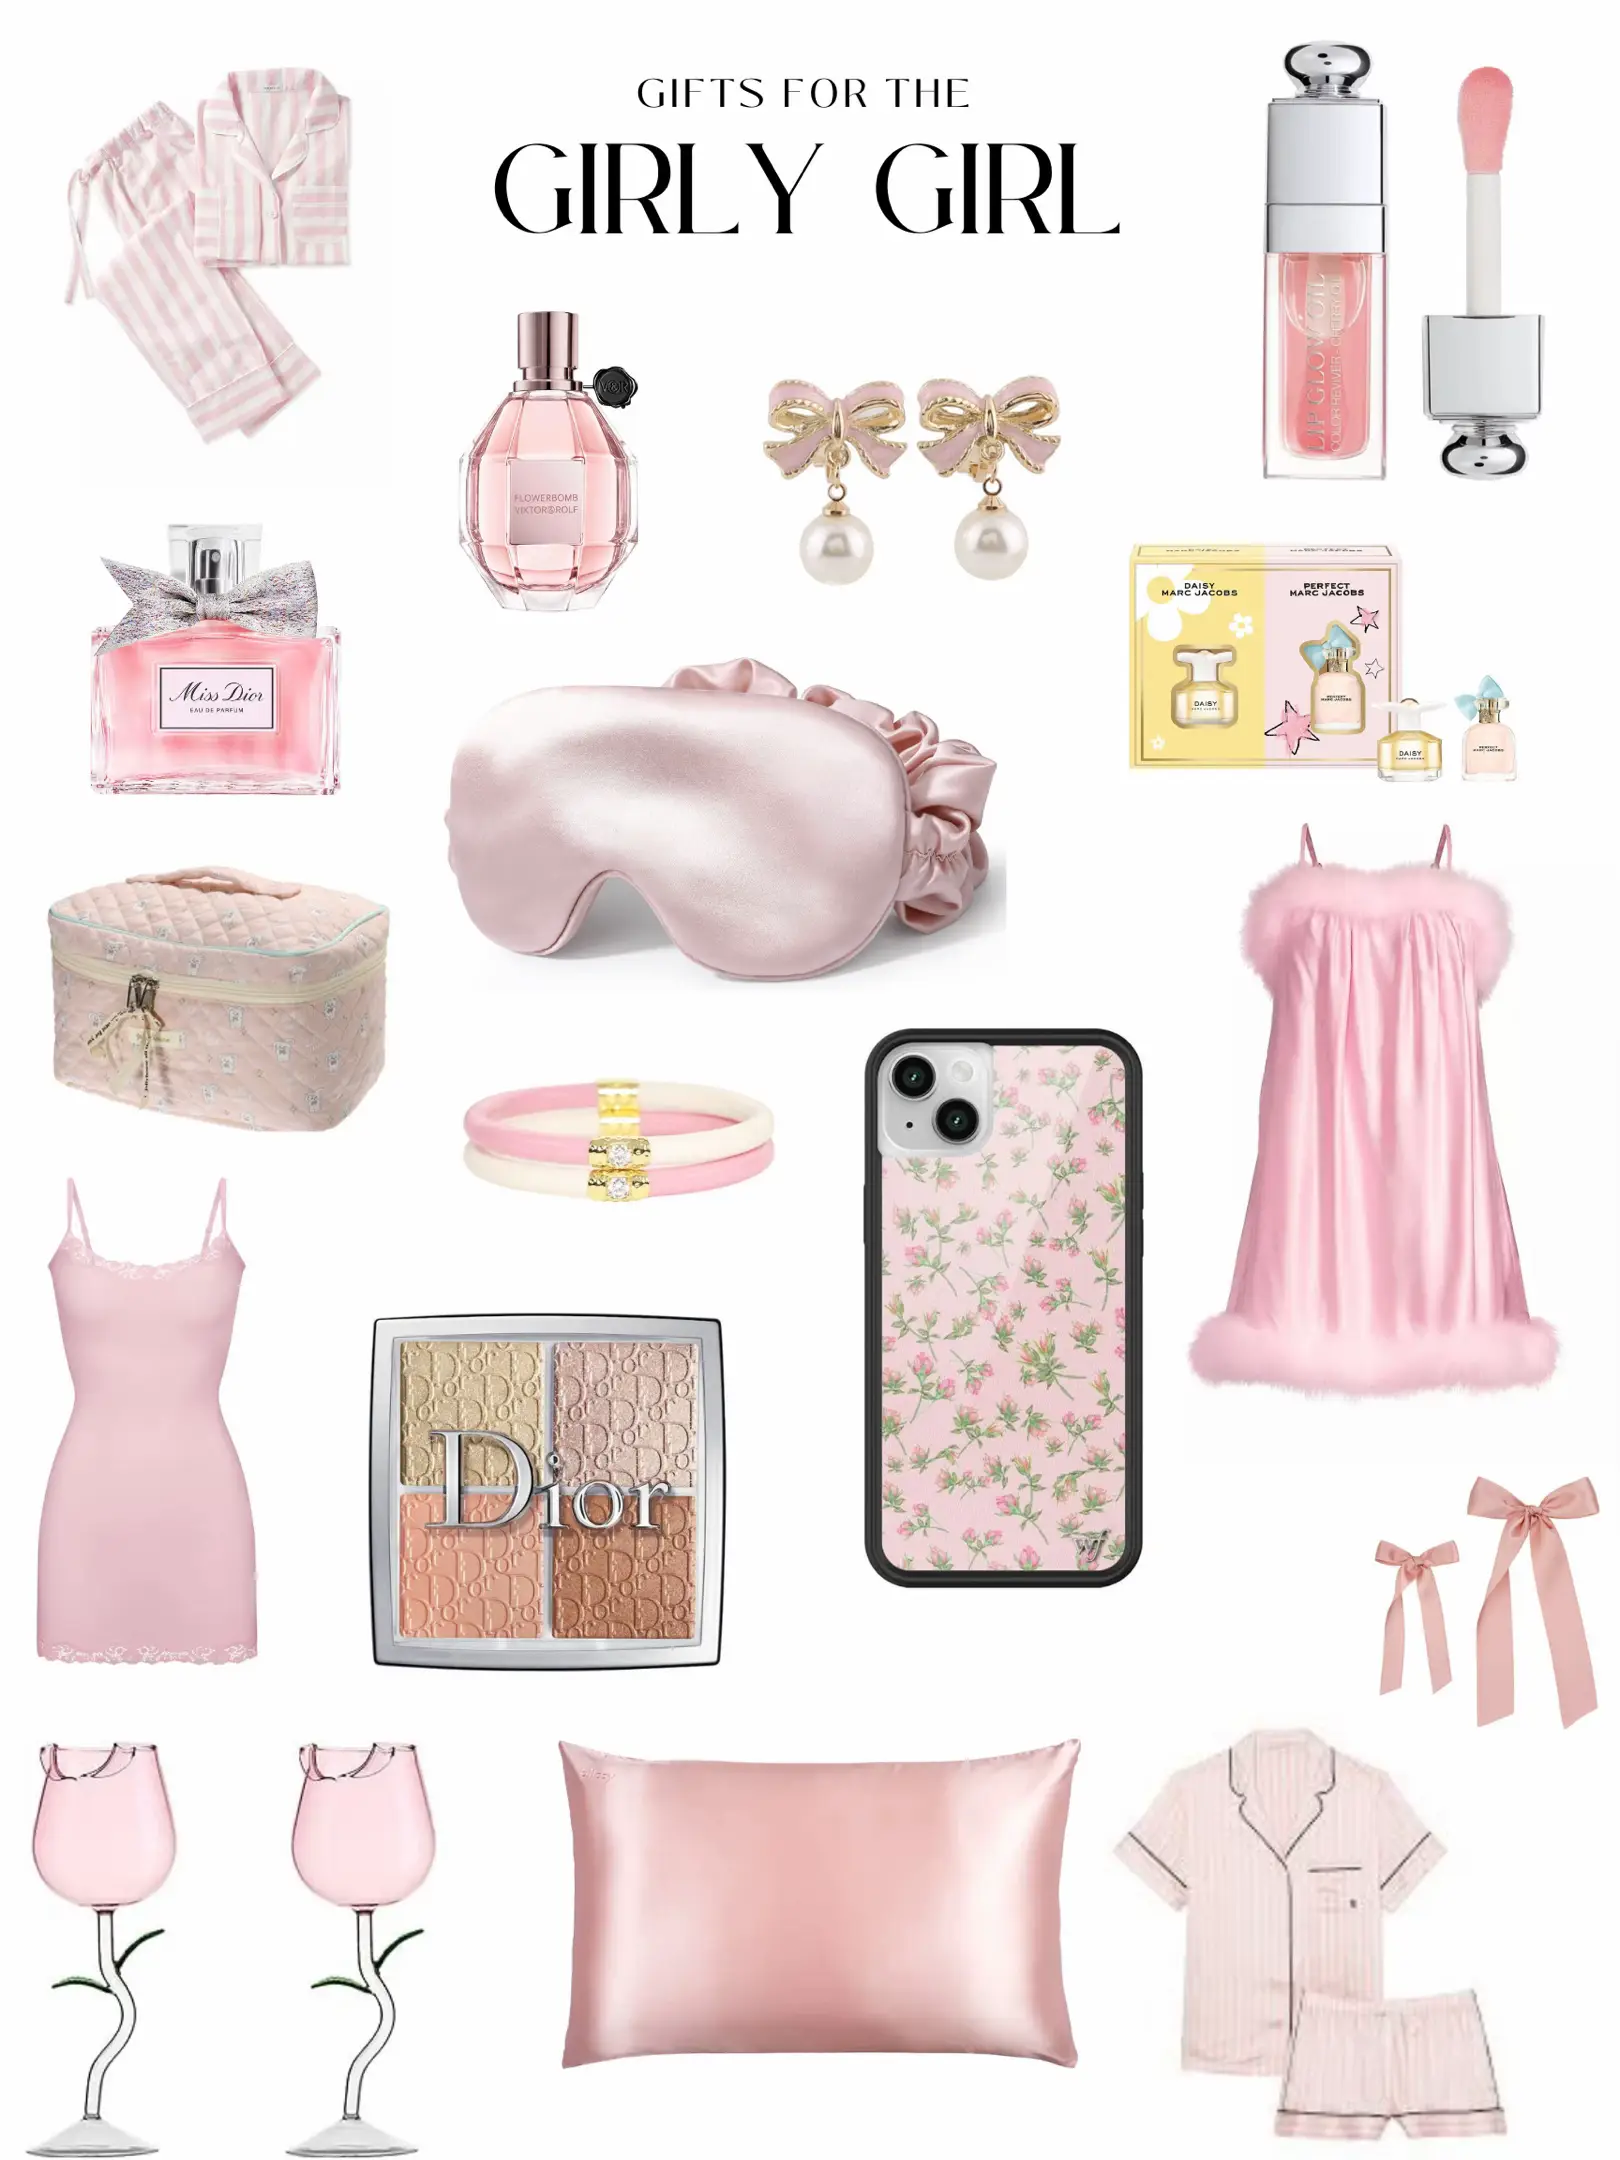 Gifts for the girly girl